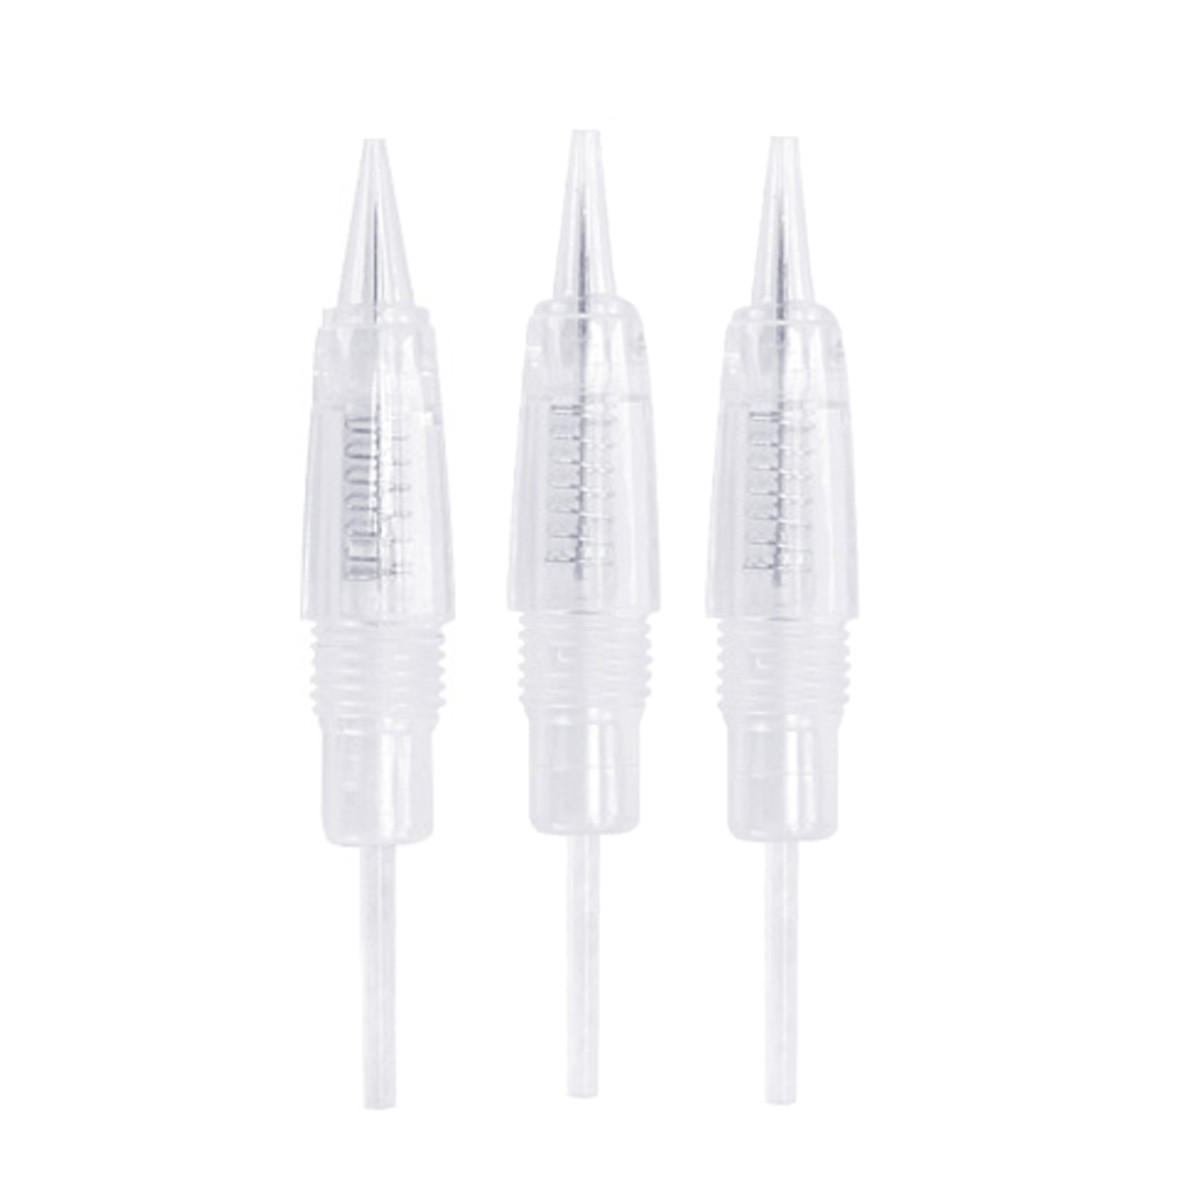 Permanent Tattoo Needle Cartridges Makeup Liner Shaders For Charmant Machine